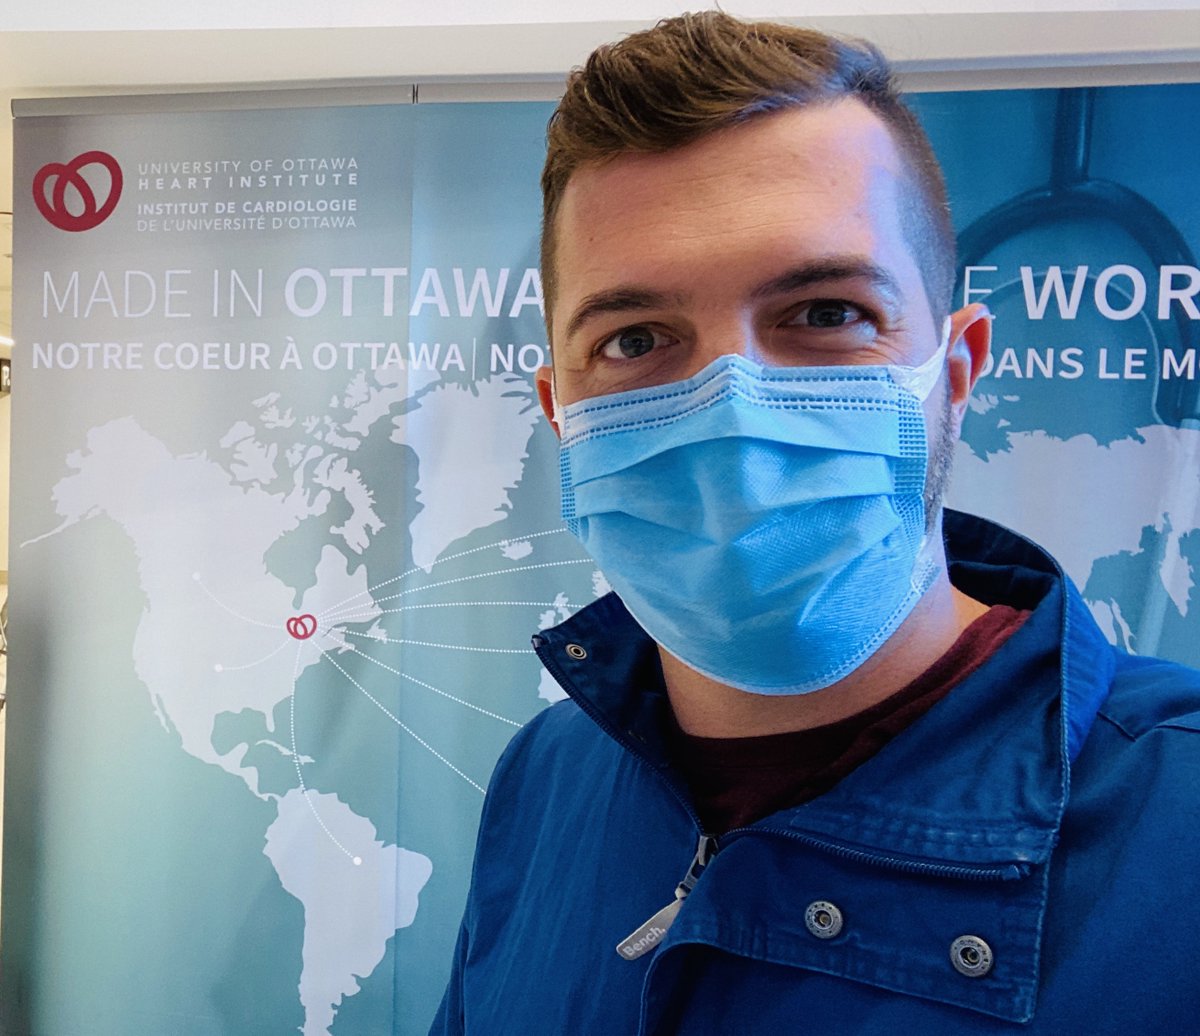 Personal note: Might be a bit of a surprise to you if you have followed my summer biking adventures (Ottawa>Kingston>Ottawa>Laurentians>Ottawa) But this morning, was inspired (read till the end) and got the courage to share a pic from my trip to the uOttawa Heart Institute. /1